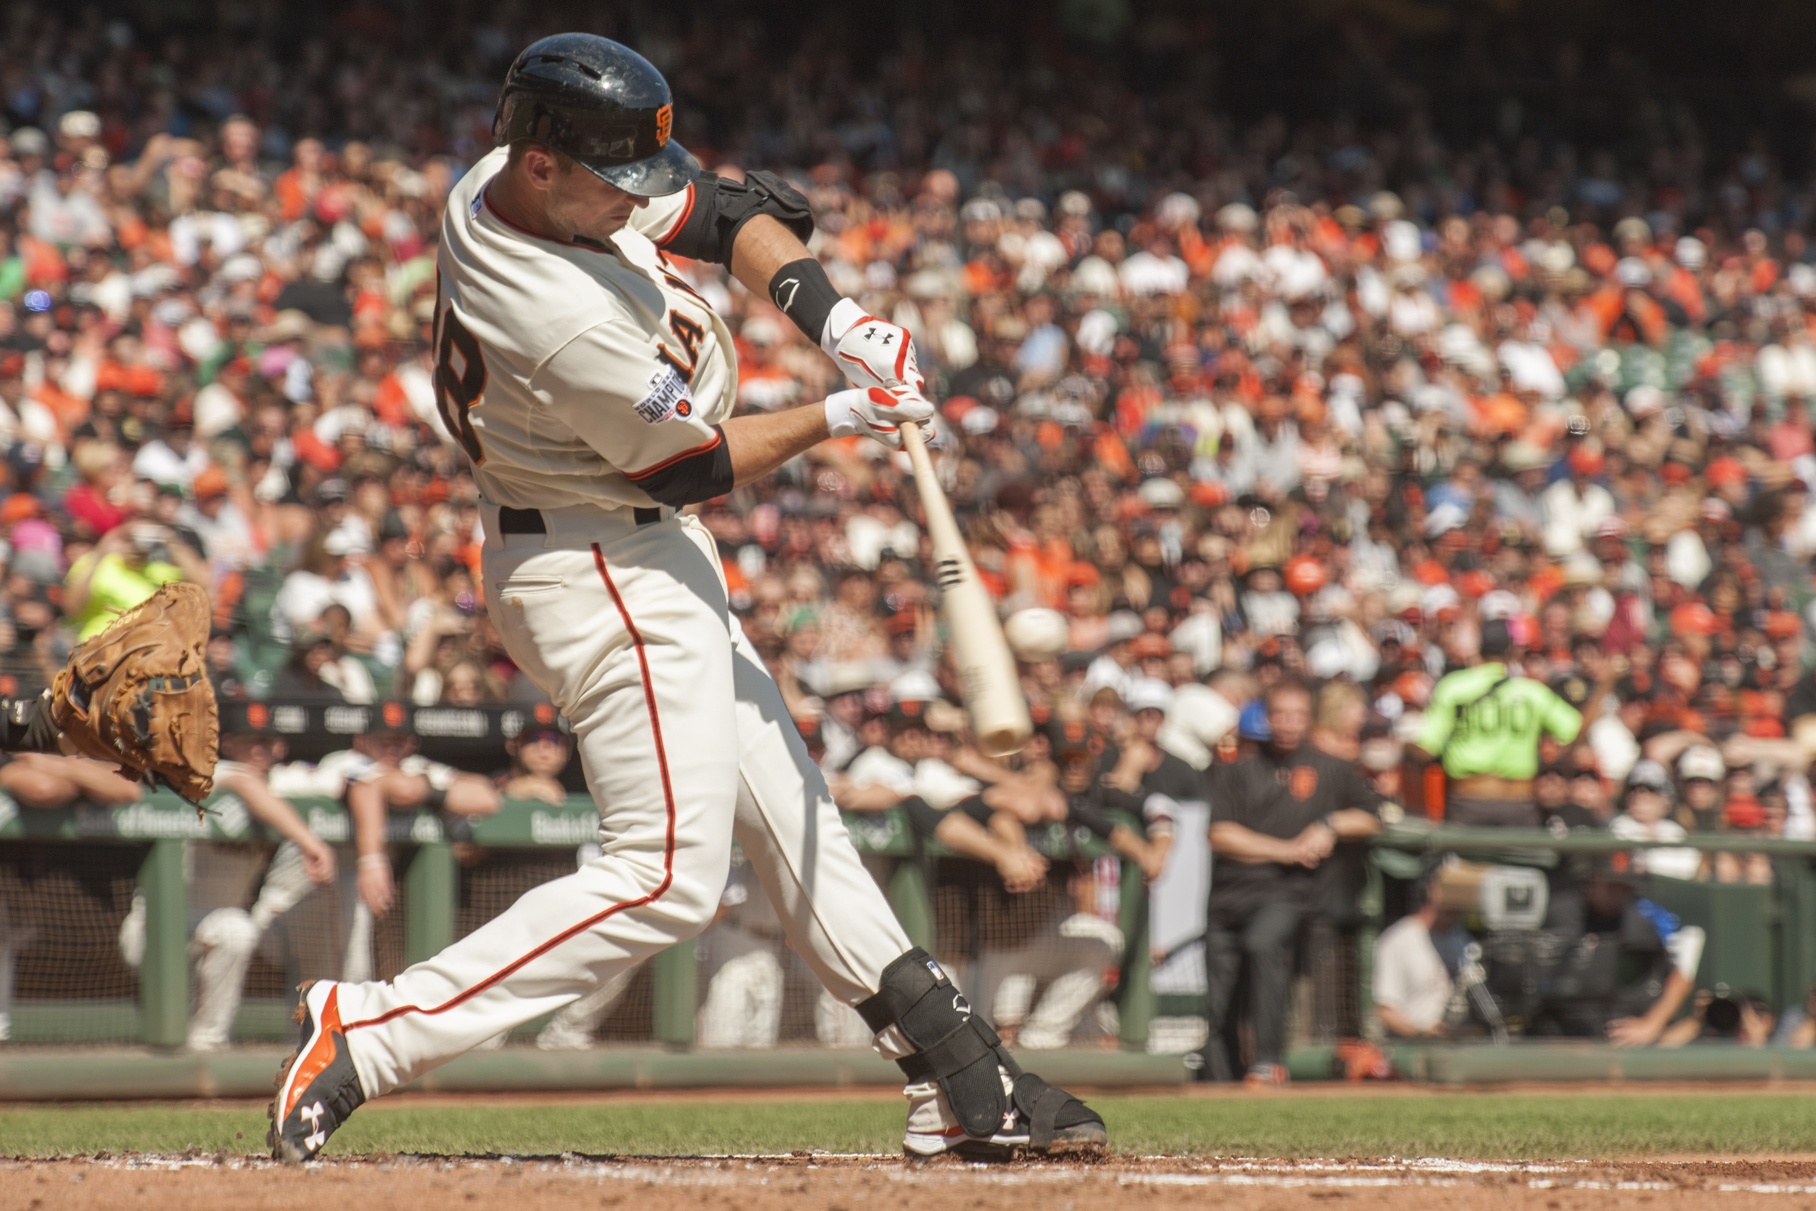 Oct 4, 2015; San Francisco, CA, USA; San Francisco Giants catcher Buster Posey (28) hits an RBI single against the Colorado Rockies during the first inning at AT&T Park. Mandatory Credit: Ed Szczepanski-USA TODAY Sports